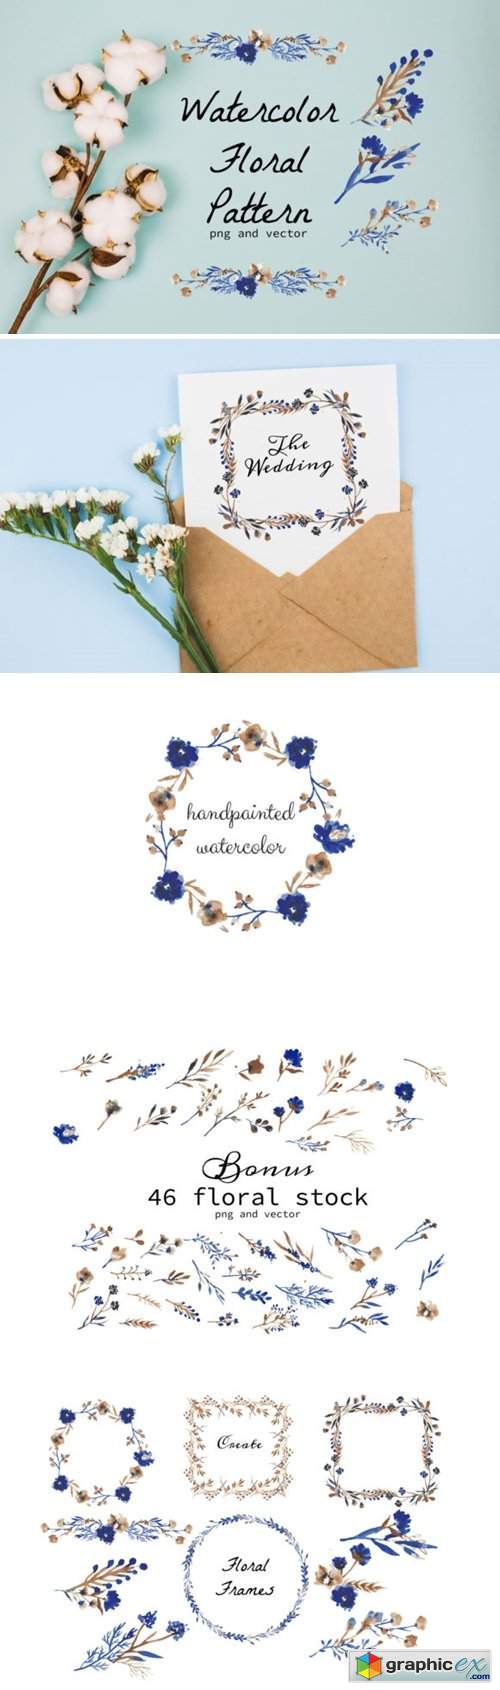 Watercolor Floral Wreath and Stock